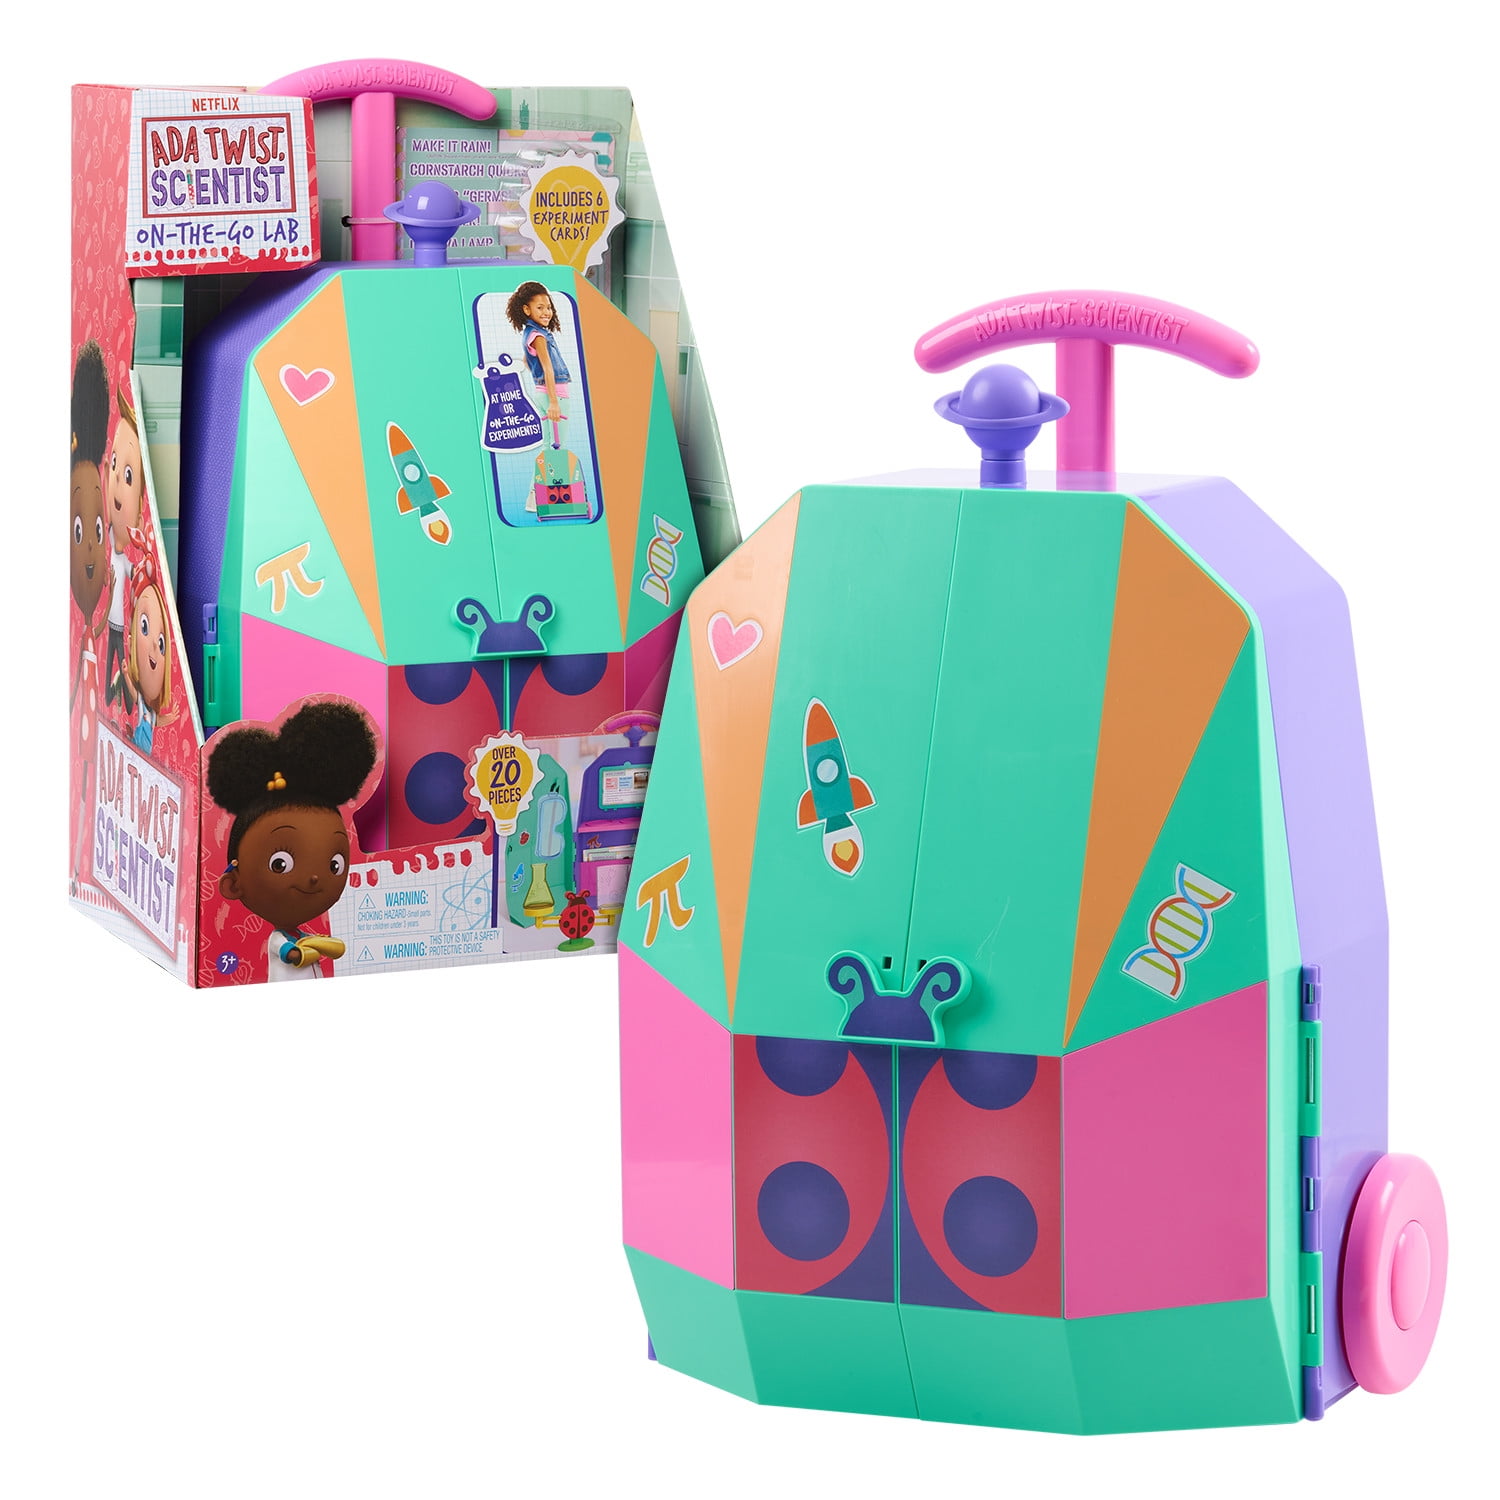 Ada Twist, Scientist On-The-Go Lab Set, STEM Projects and Toys for Kids, Kids Toys for Ages 3 up